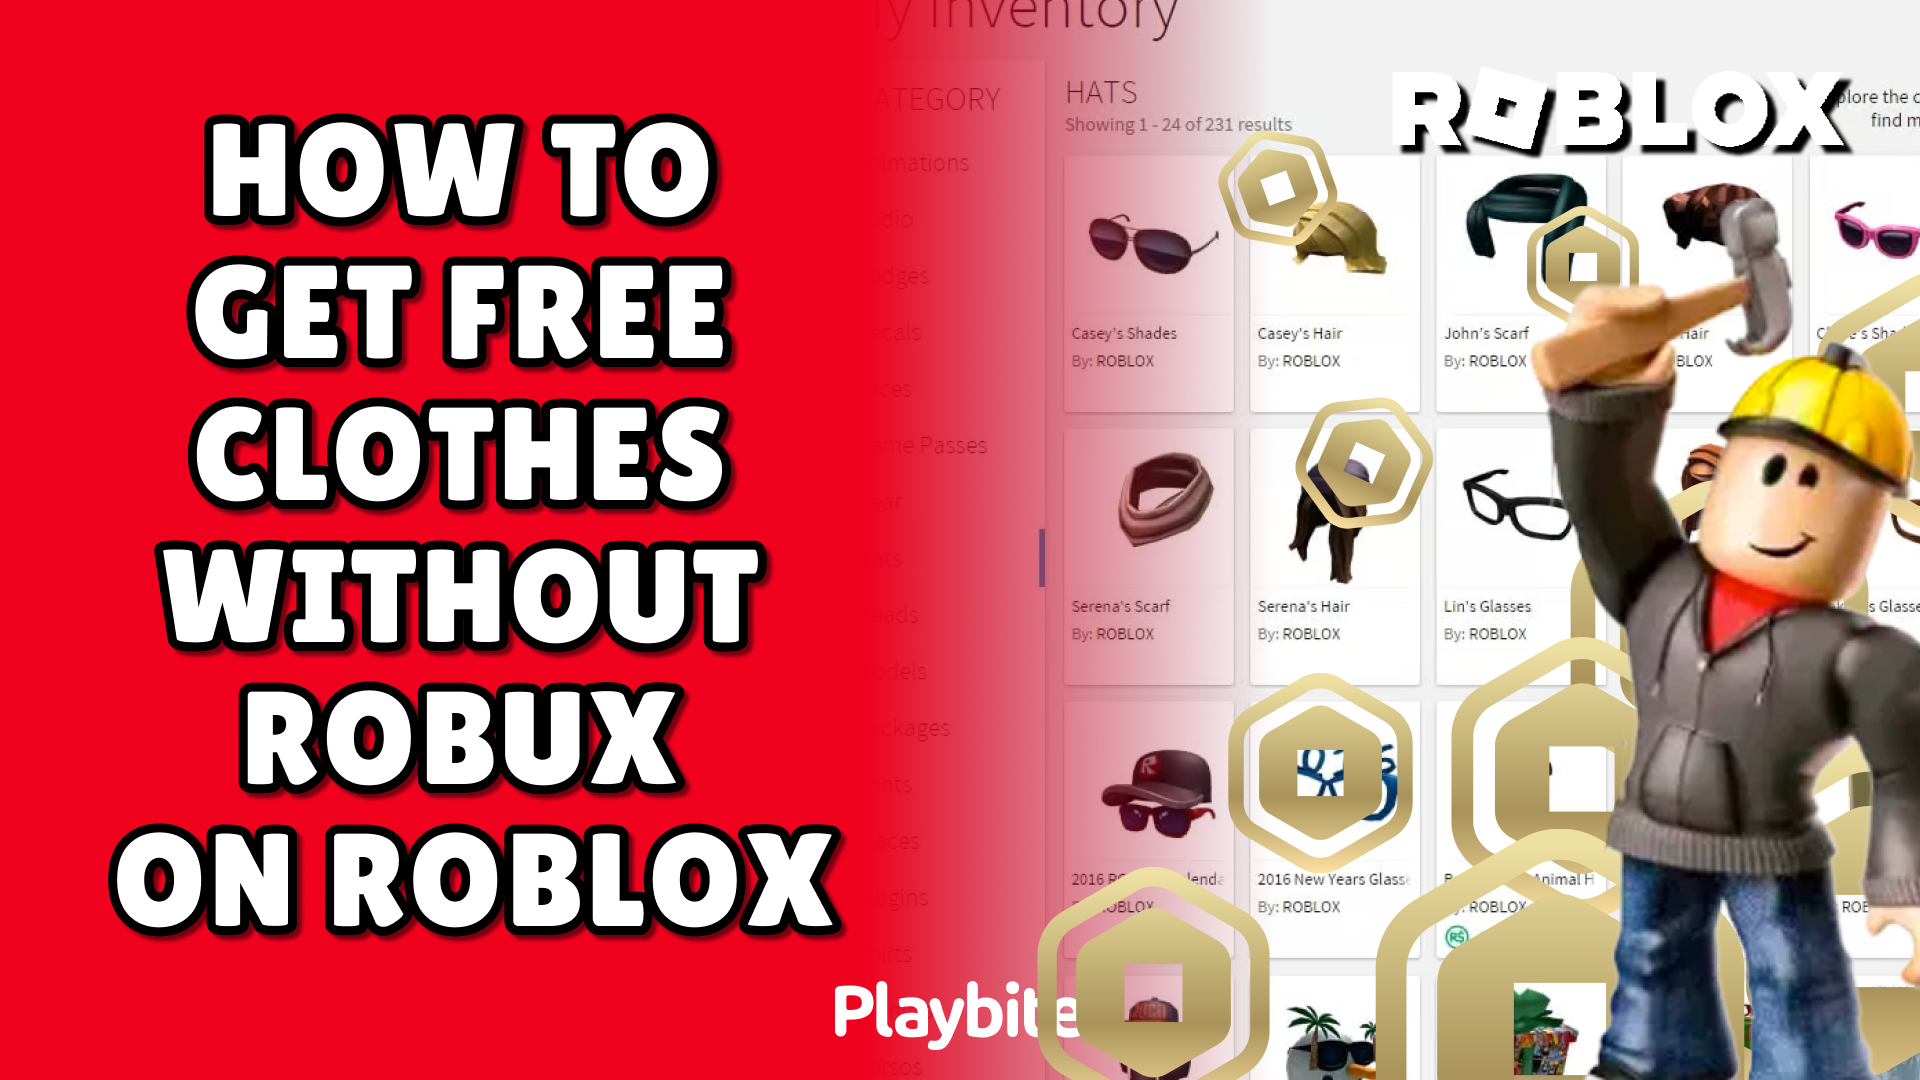 How to Get Free Clothes Without Robux on Roblox